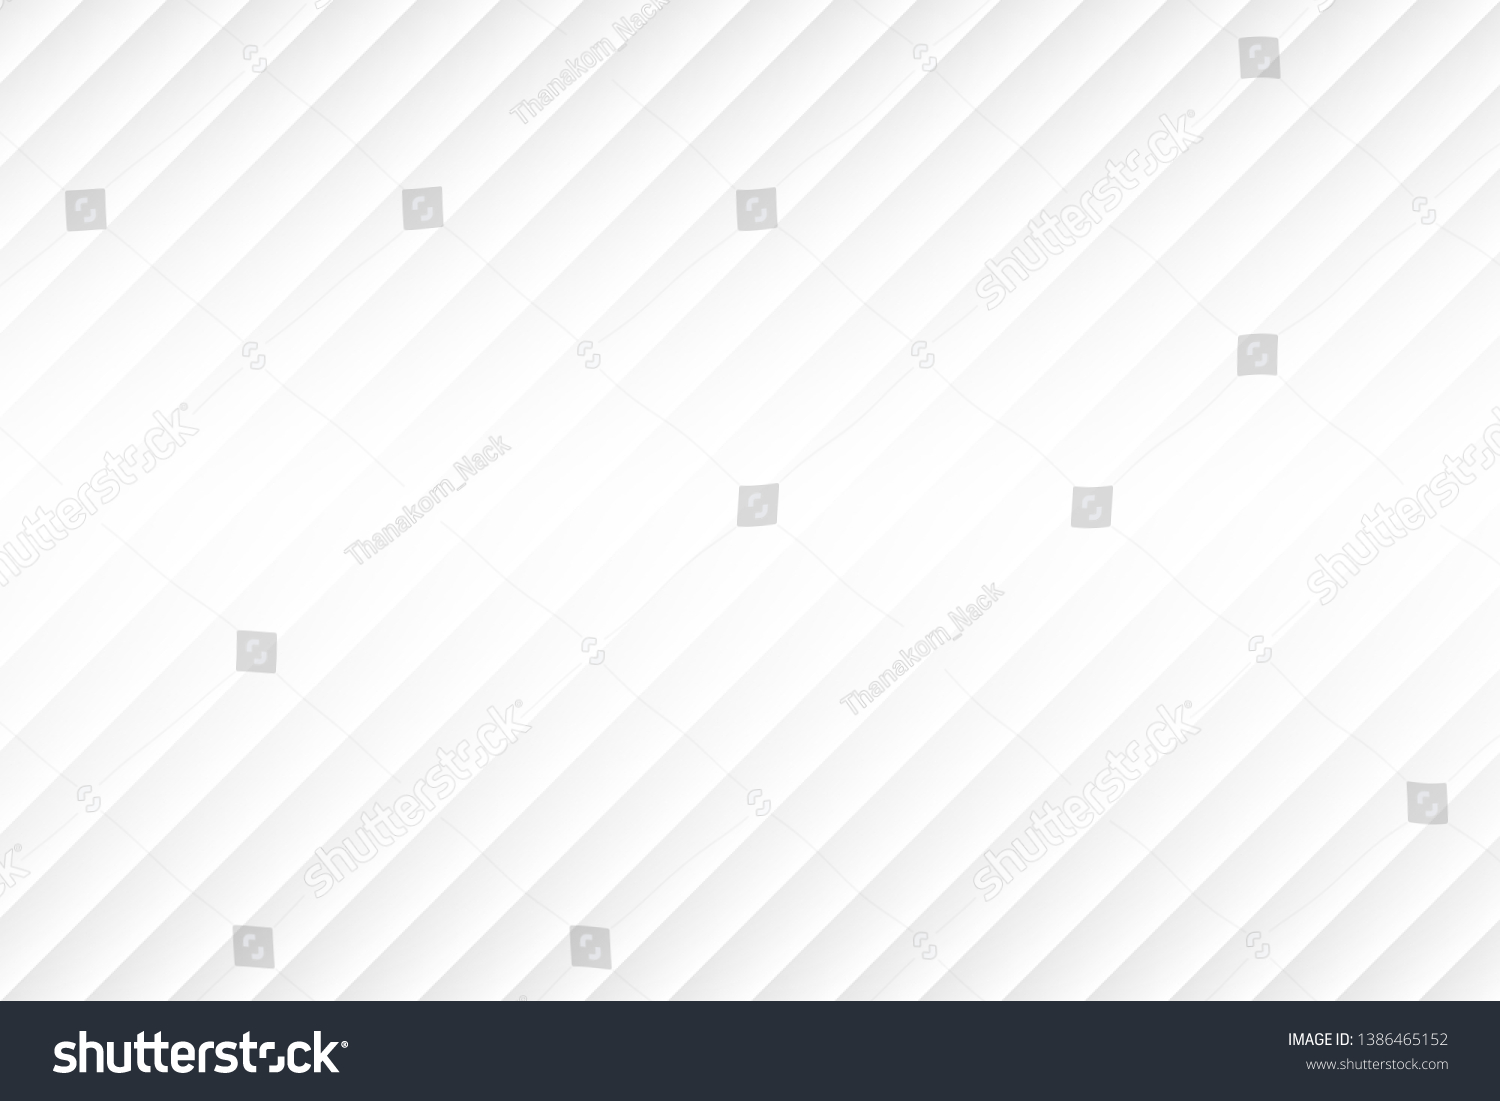 Abstract white and gray color background.texture with diagonal lines.Vector background can be used in cover design, book design, poster, cd cover, flyer, website backgrounds or advertising. #1386465152